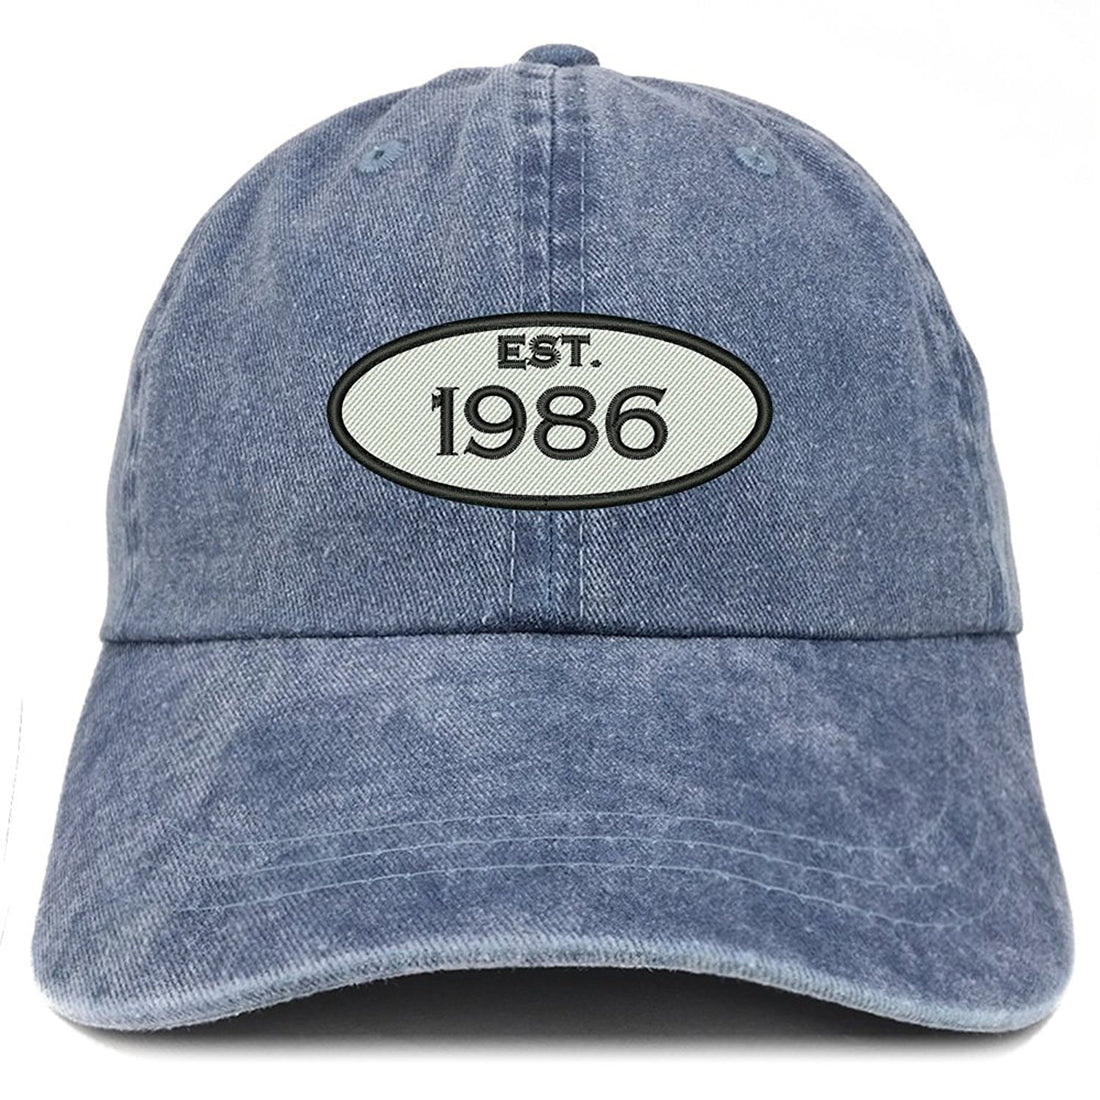 Trendy Apparel Shop Established 1986 Embroidered 33rd Birthday Gift Pigment Dyed Washed Cotton Cap